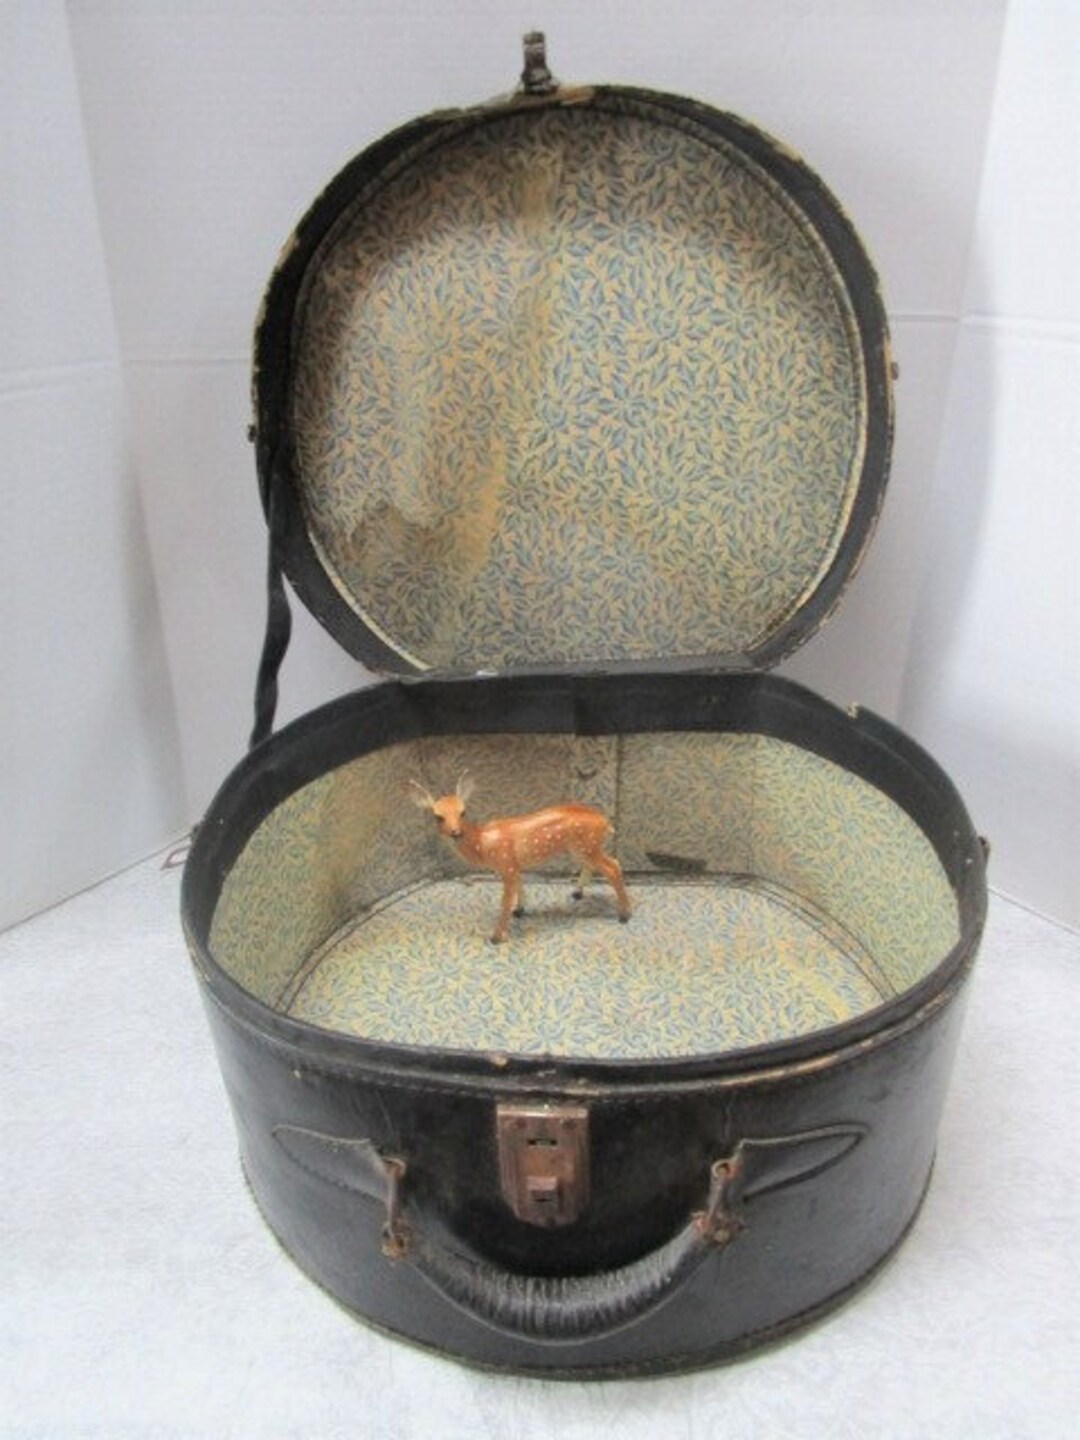 Lot #184 - Beautiful Decorative Hat Boxes and Old World Style Suitcase Decorative  Box - Puget Sound Estate Auctions.com